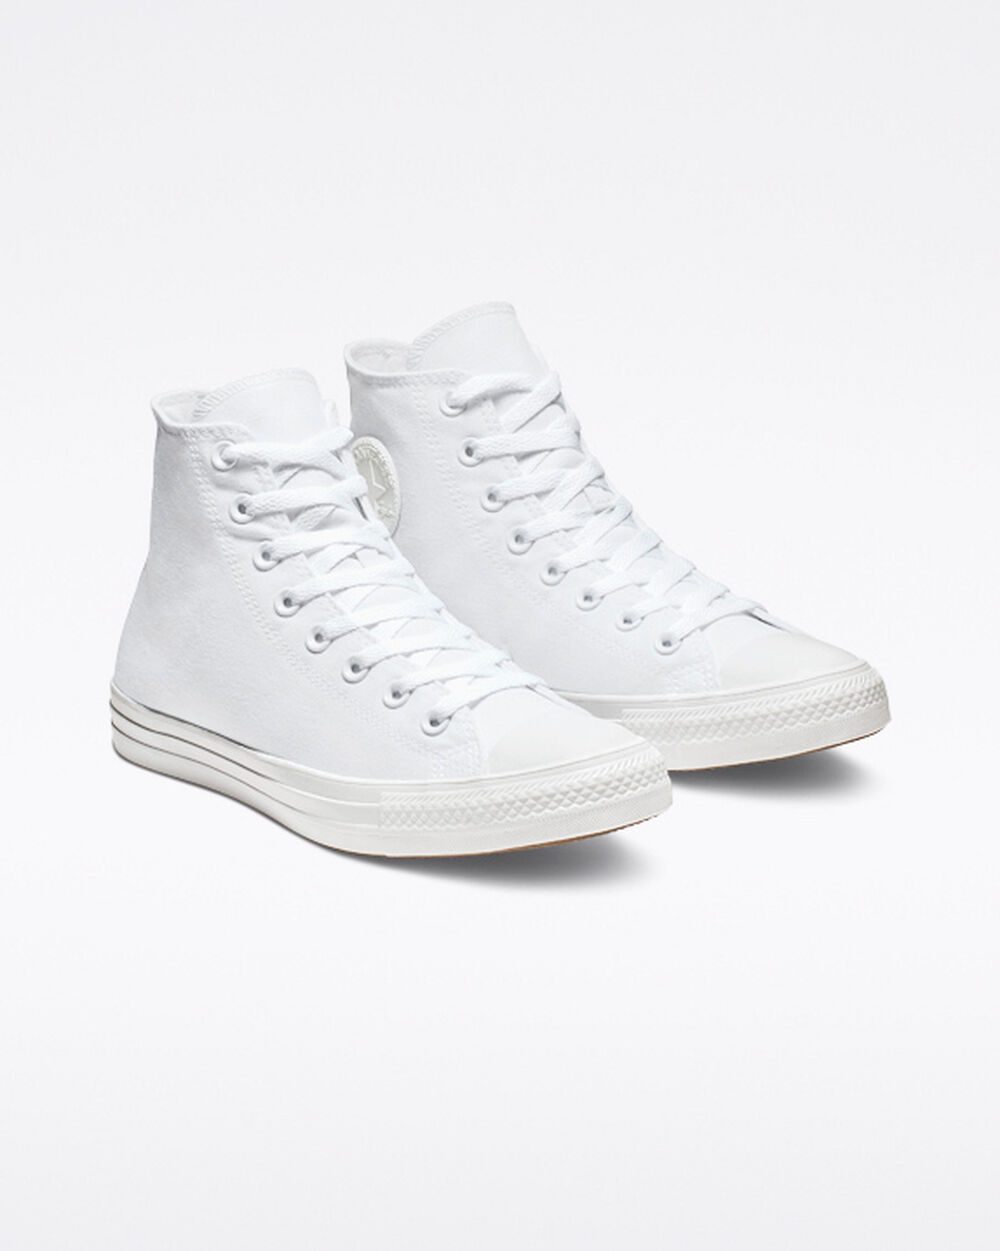 Tenis Converse Chuck Taylor All Star Mujer Blancos | Mexico-458666